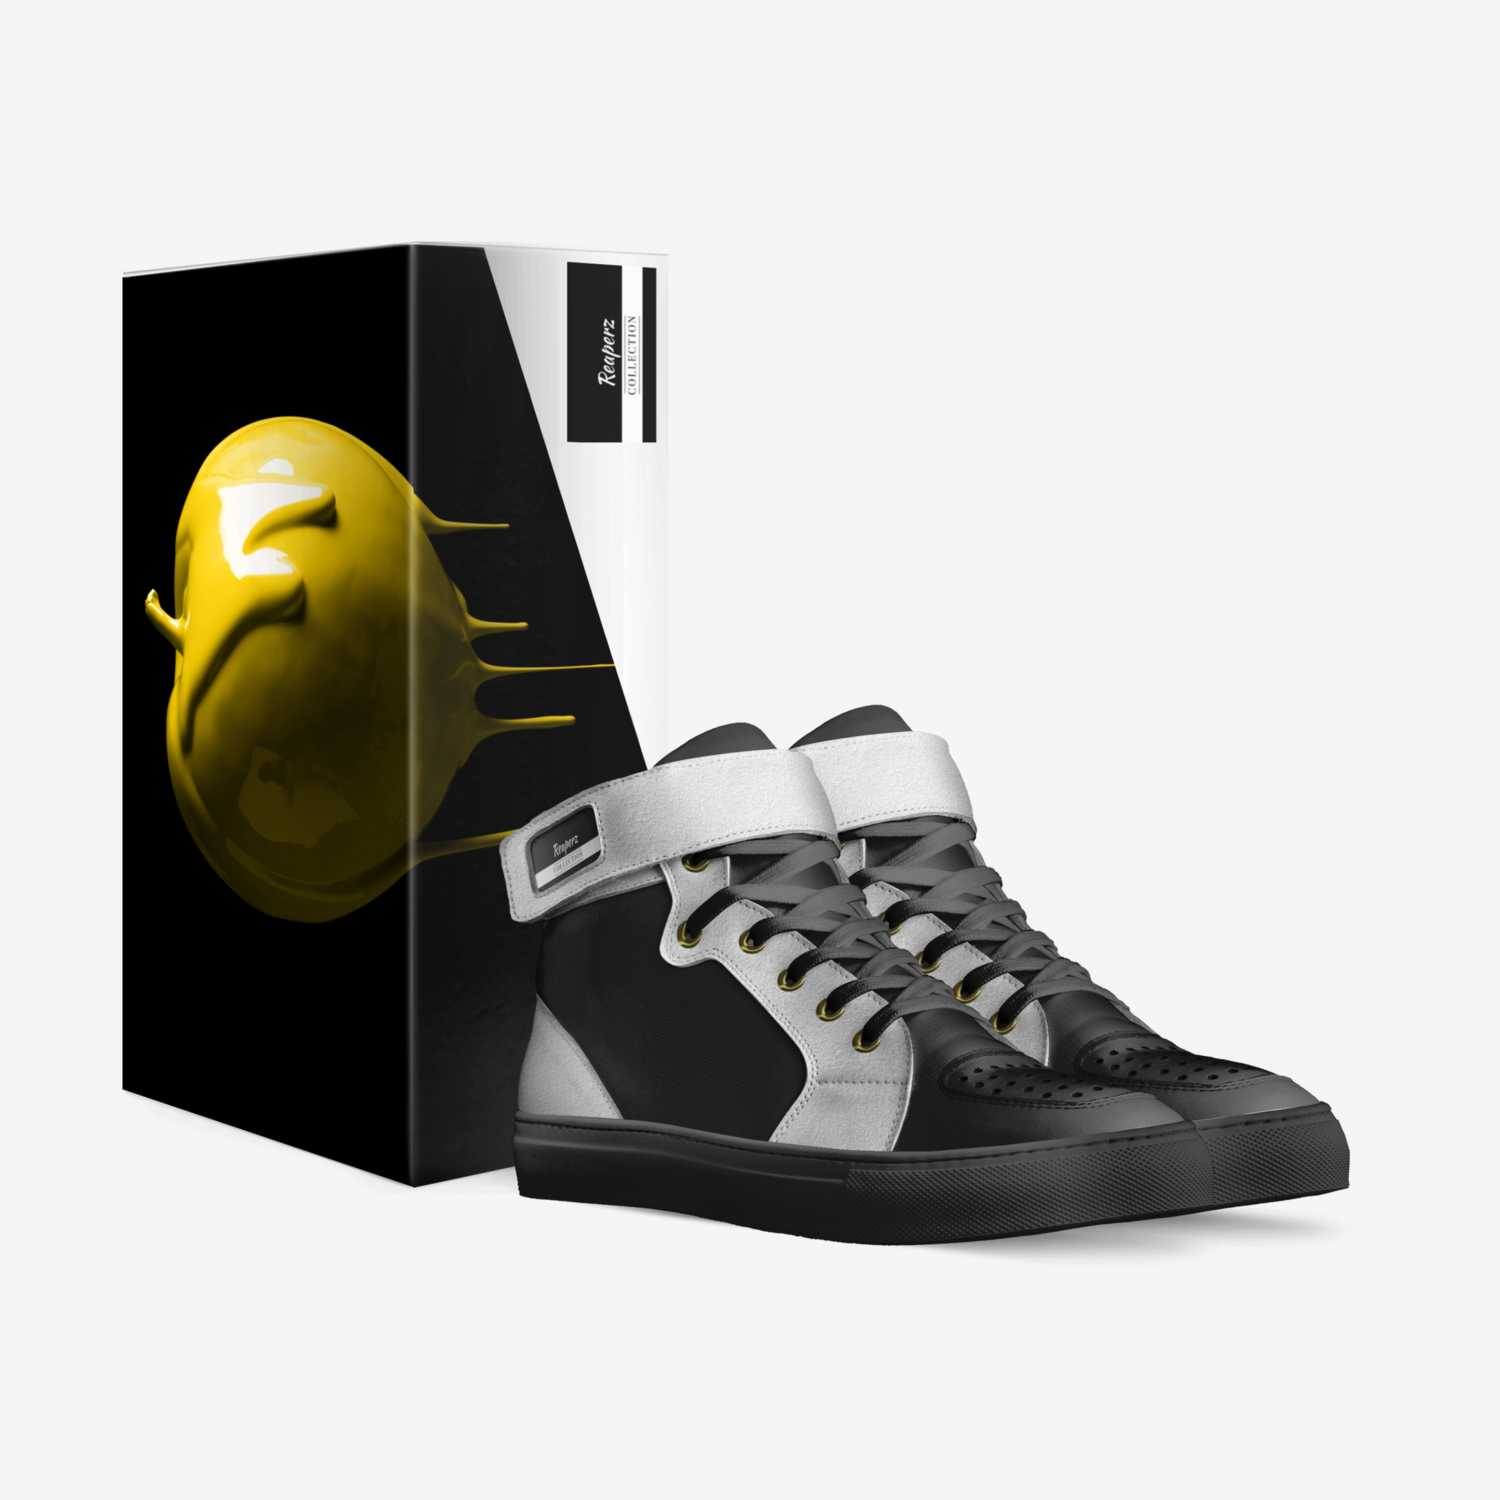 Reaperz custom made in Italy shoes by Moses Thegrimreap | Box view